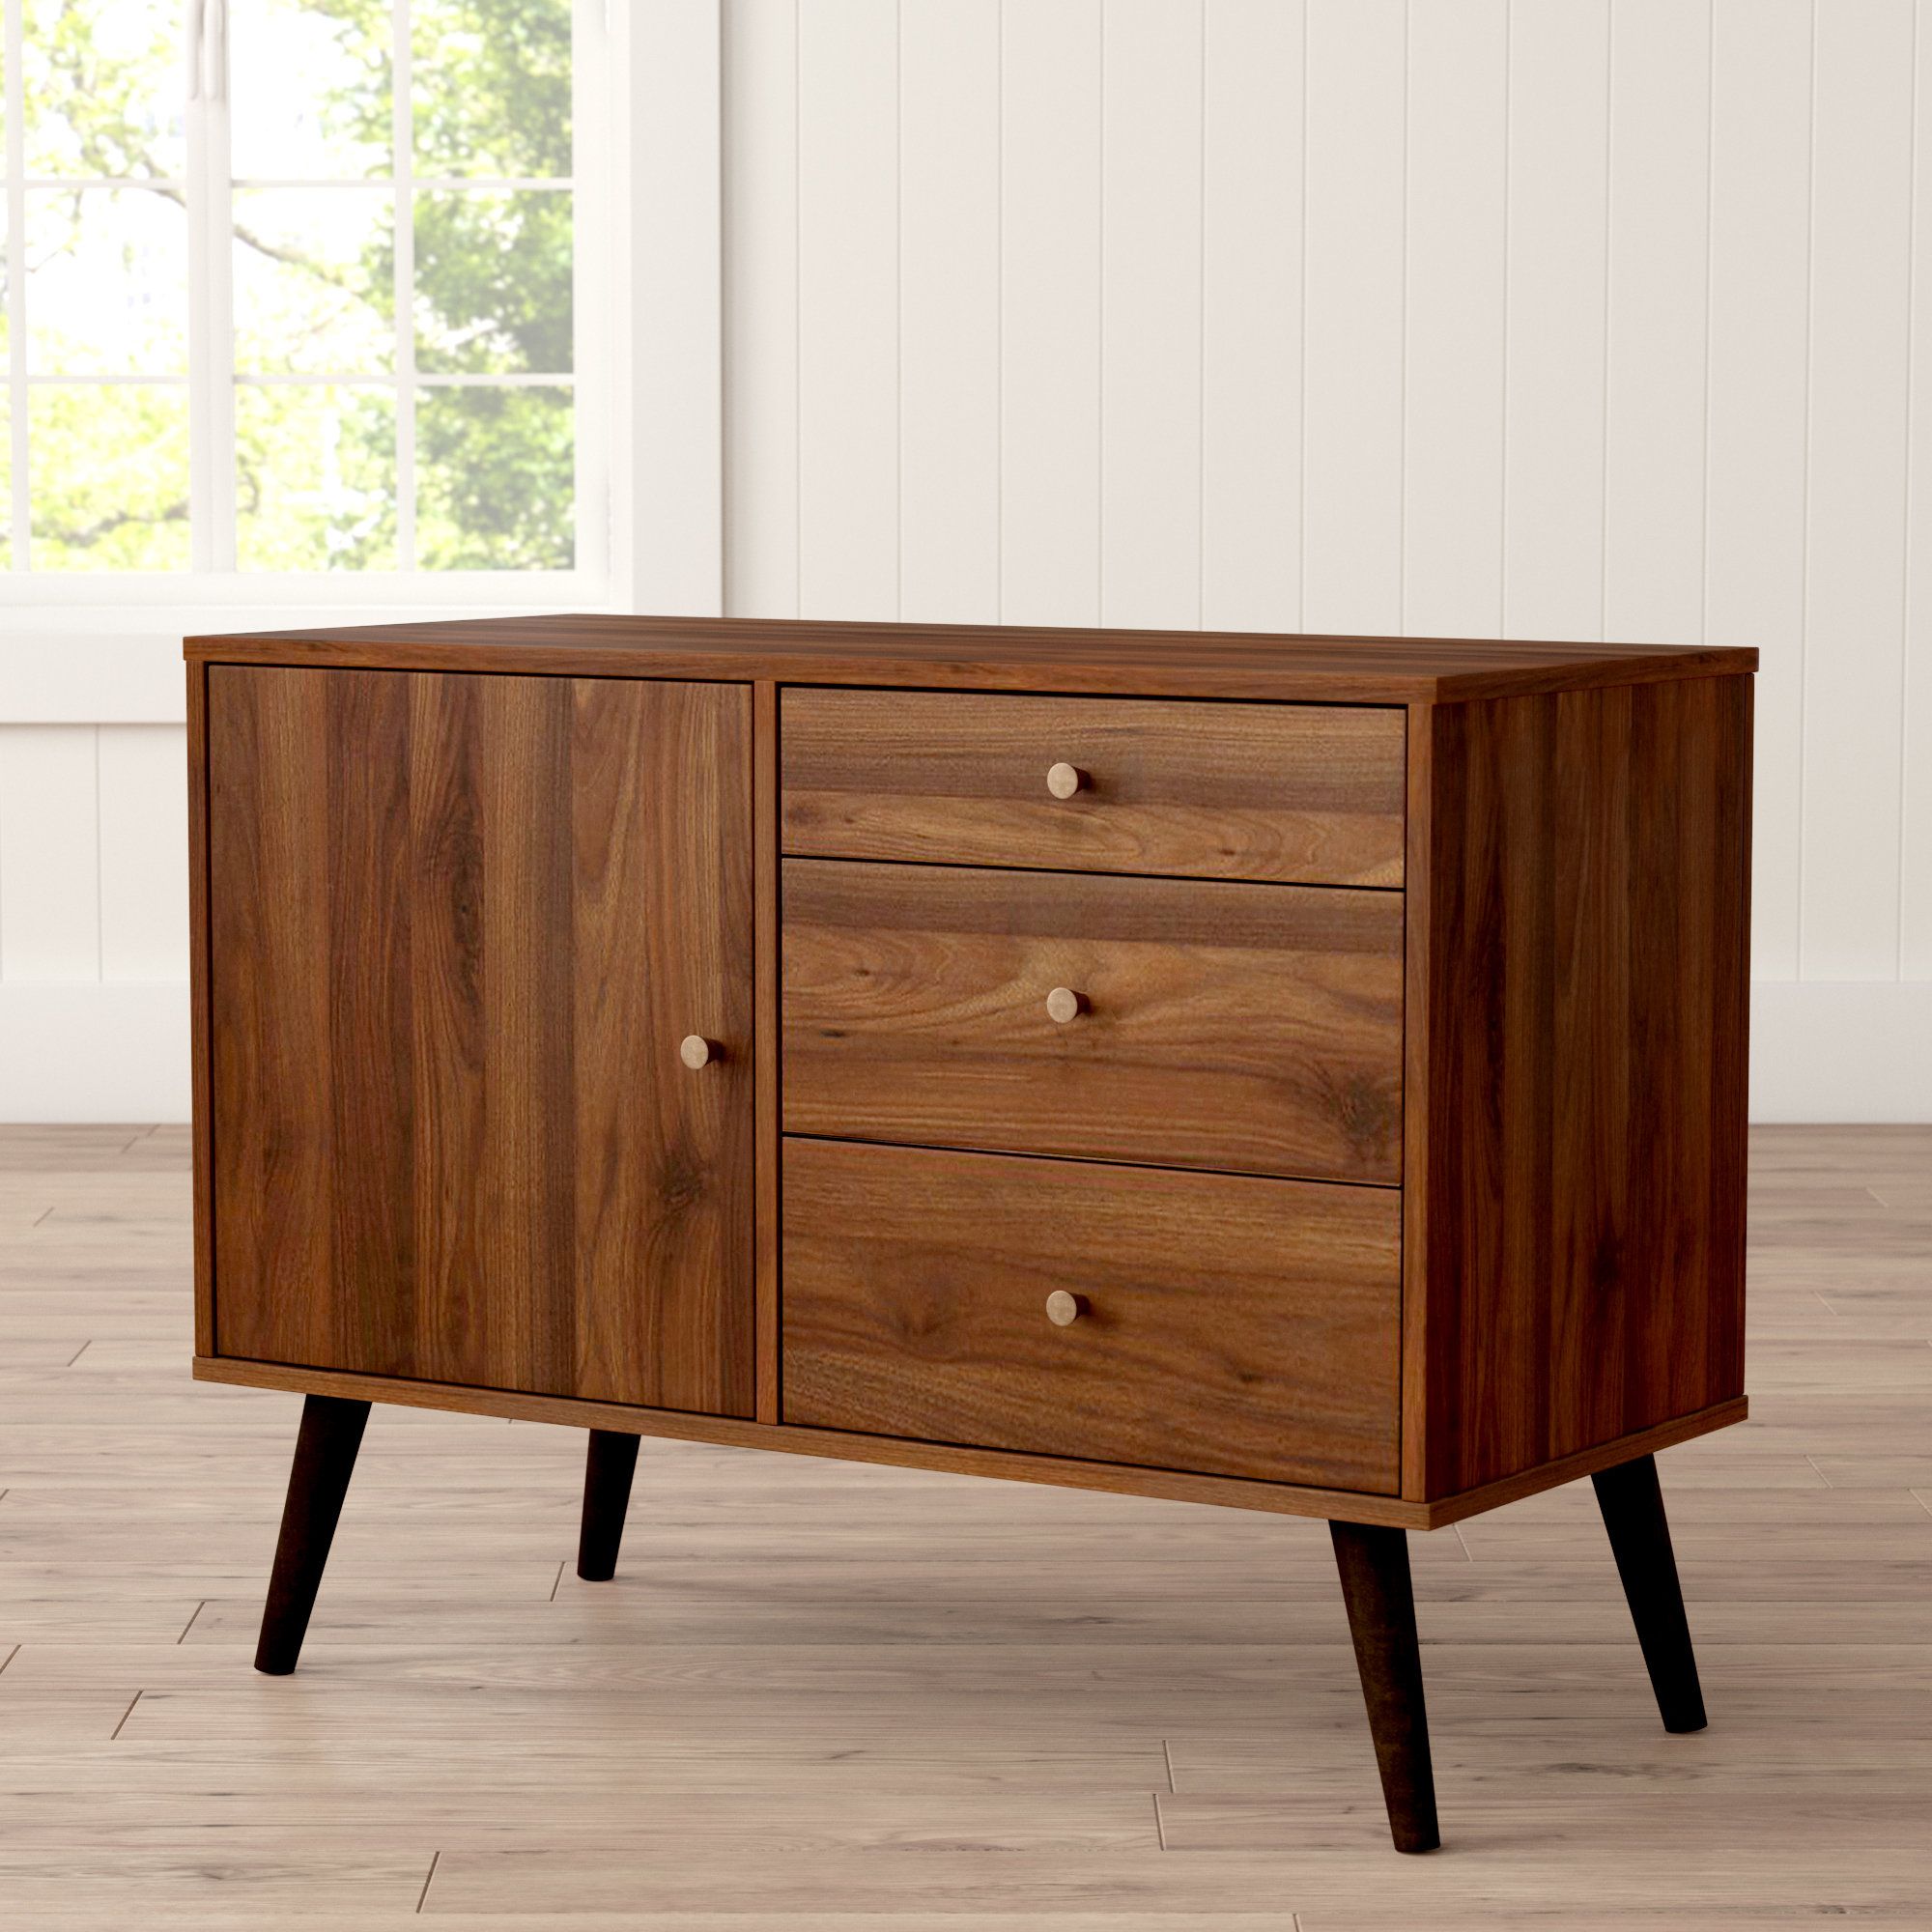 Farmhouse & Rustic Sideboards & Buffets | Birch Lane Throughout Ilyan Traditional Wood Sideboards (View 6 of 20)